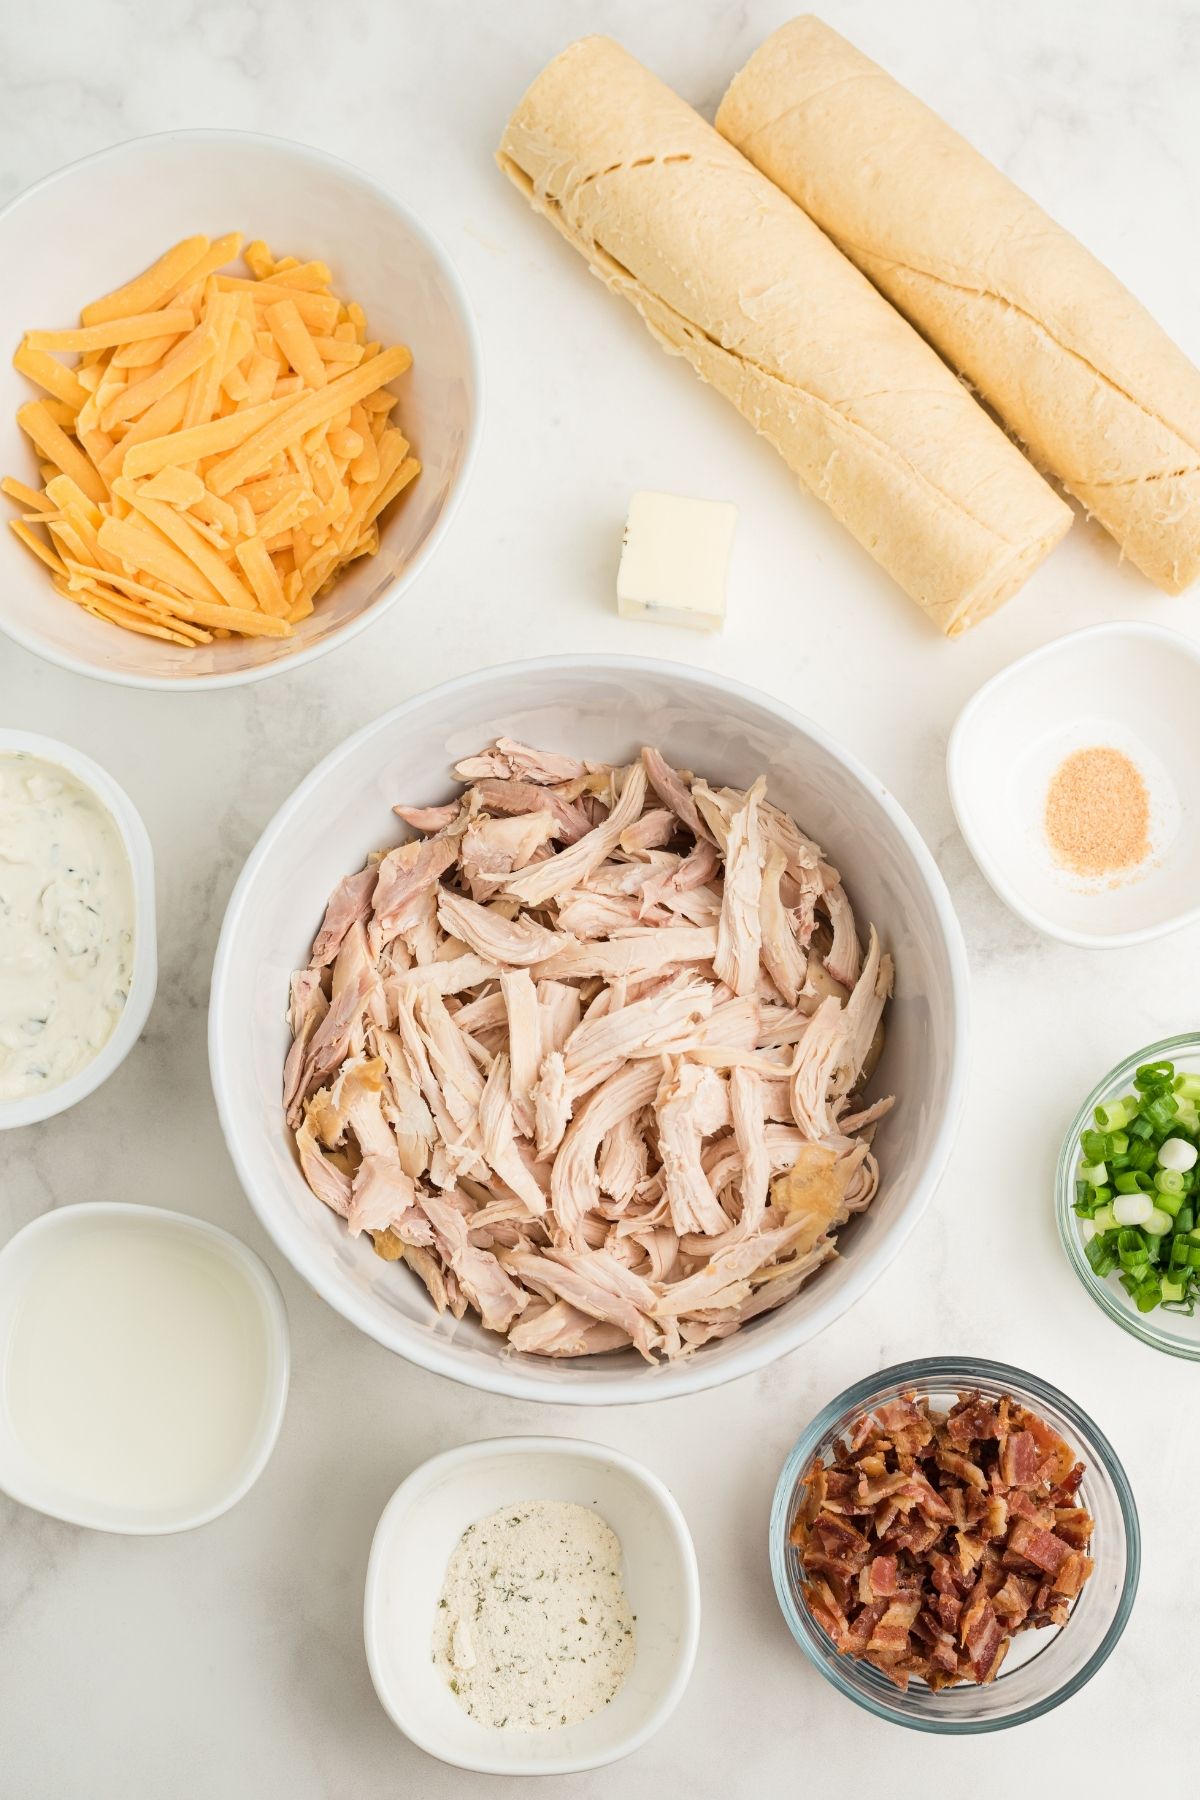 ingredients in white bowls on counter: cheese, shredded chicken, seasonings, cream cheese, Ranch, scallions, chopped bacon and two rolls of crescents